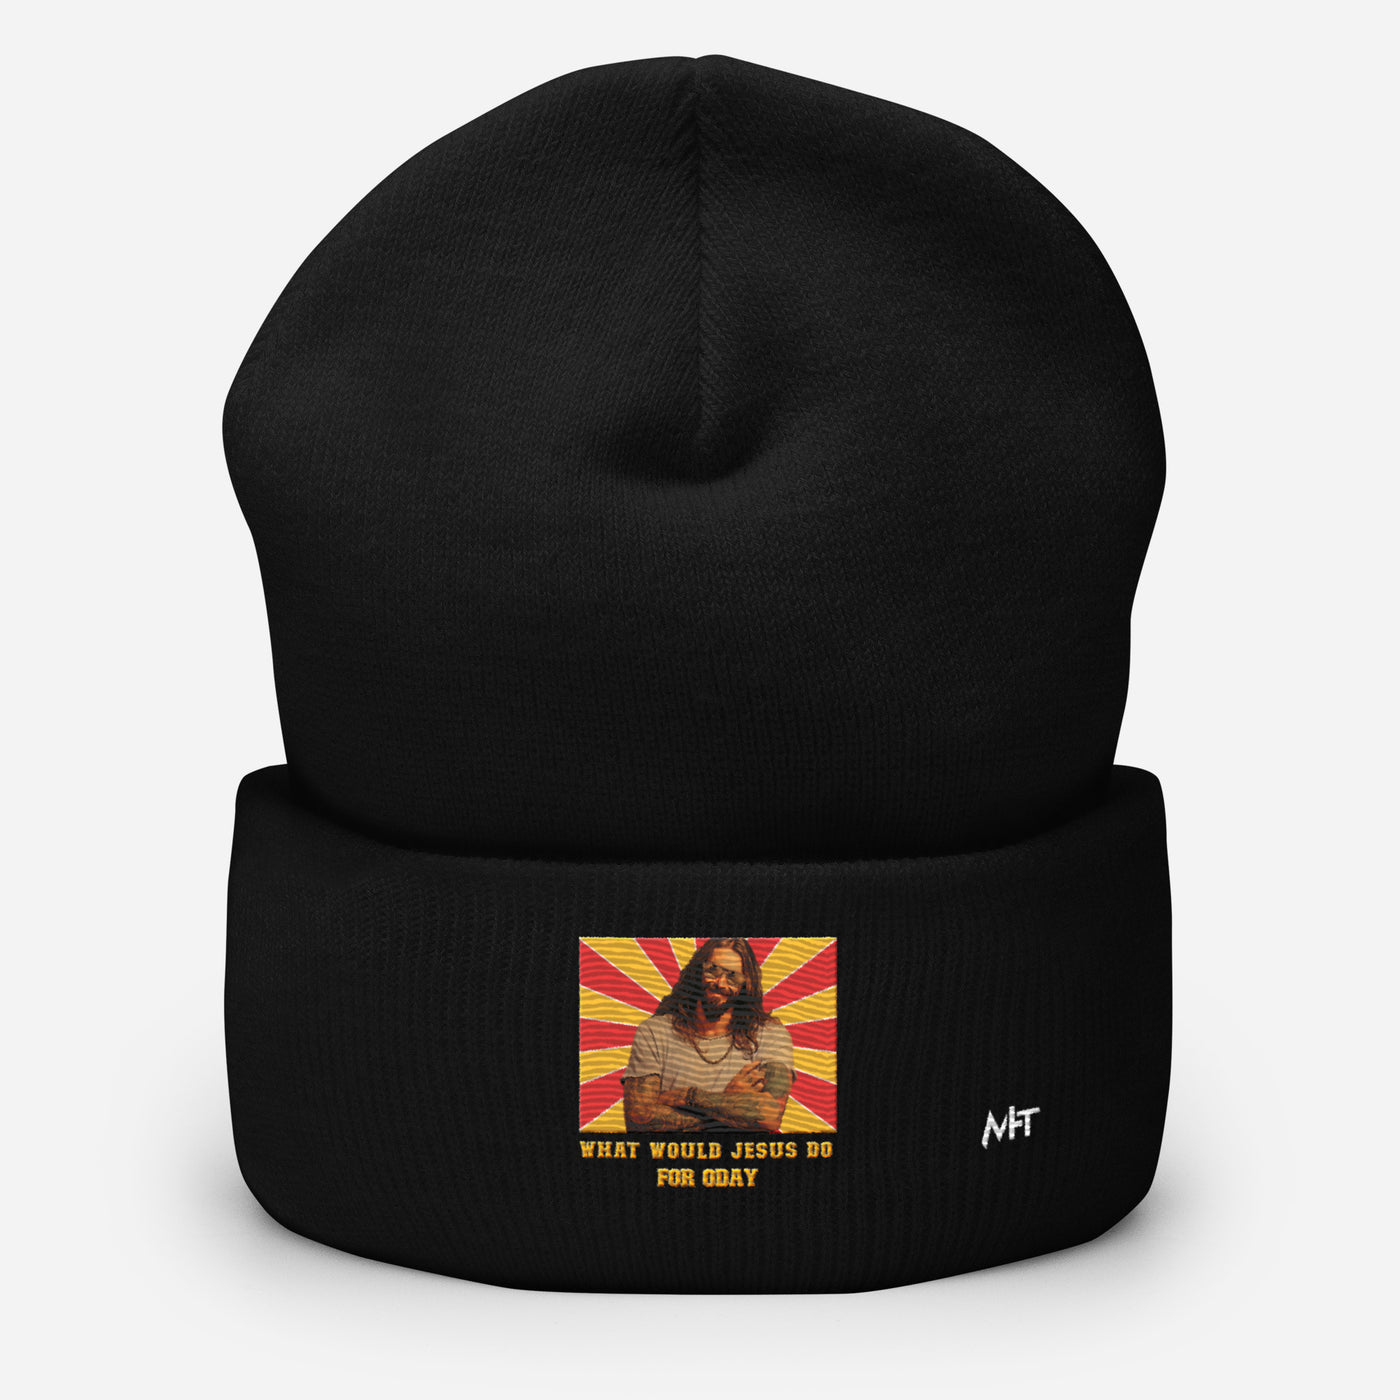 What would Jesus do for 0day v1 - Cuffed Beanie